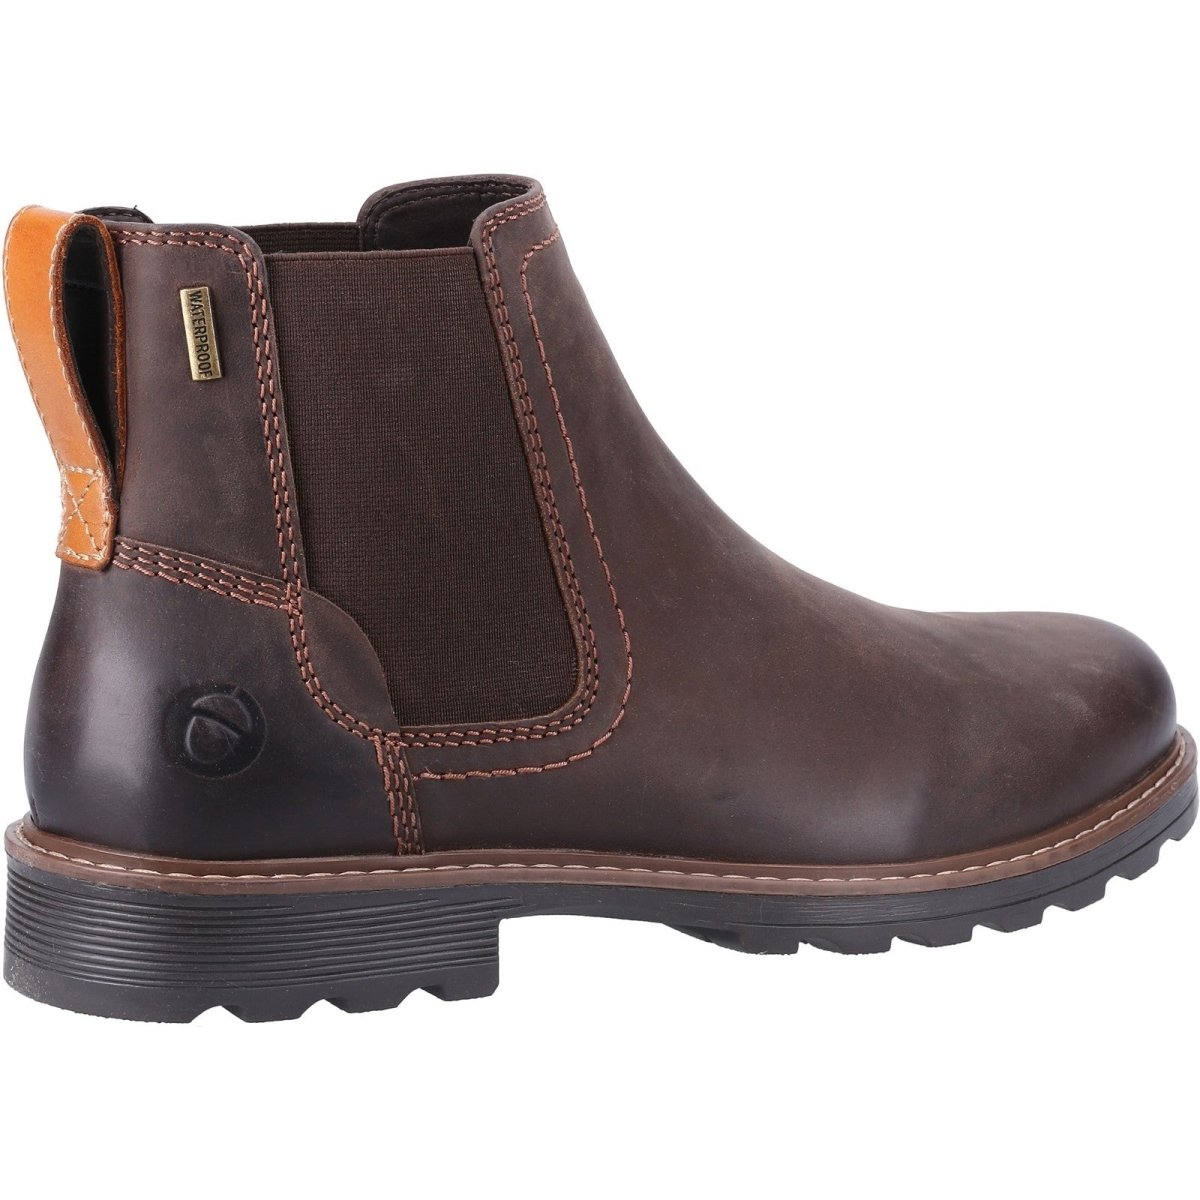 Cotswold Nibley Boots - Shoe Store Direct